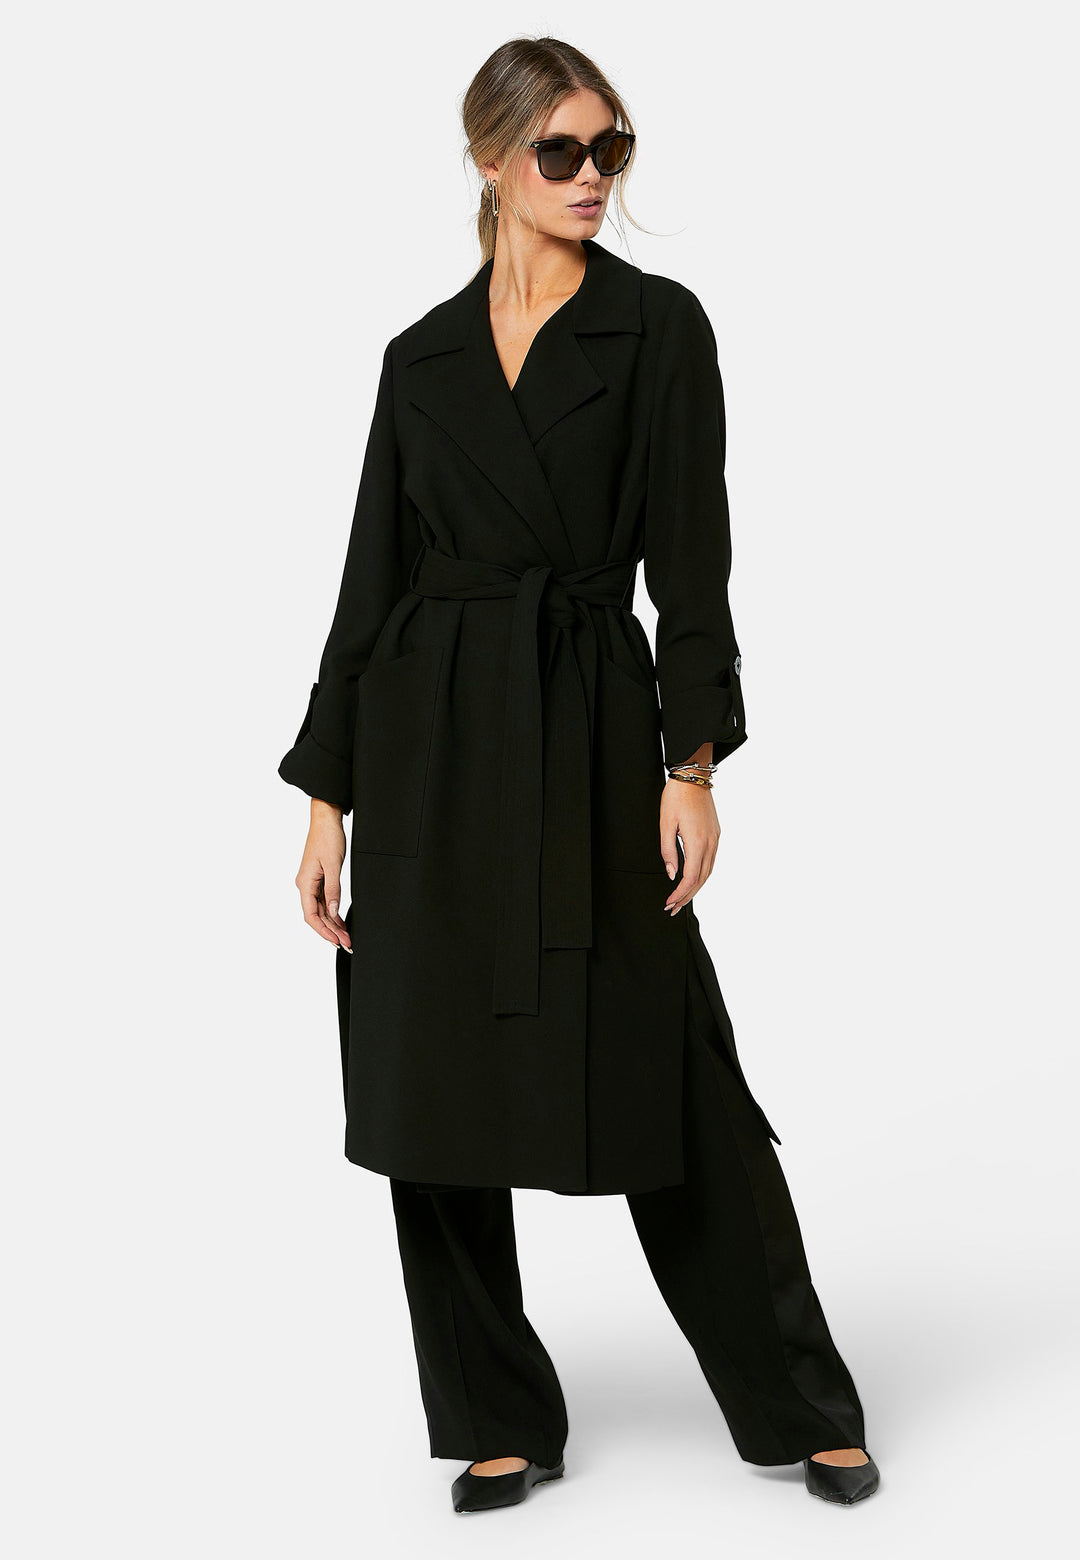 Lydiah, black trench coat in a fluid satin back crepe. This coat features a relaxed, flowing silhouette, a self-tie belt, and front pockets. The design includes buttoned cuffs and a wide lapel. Pair with coordinating trouser for a chic monochromatic look.